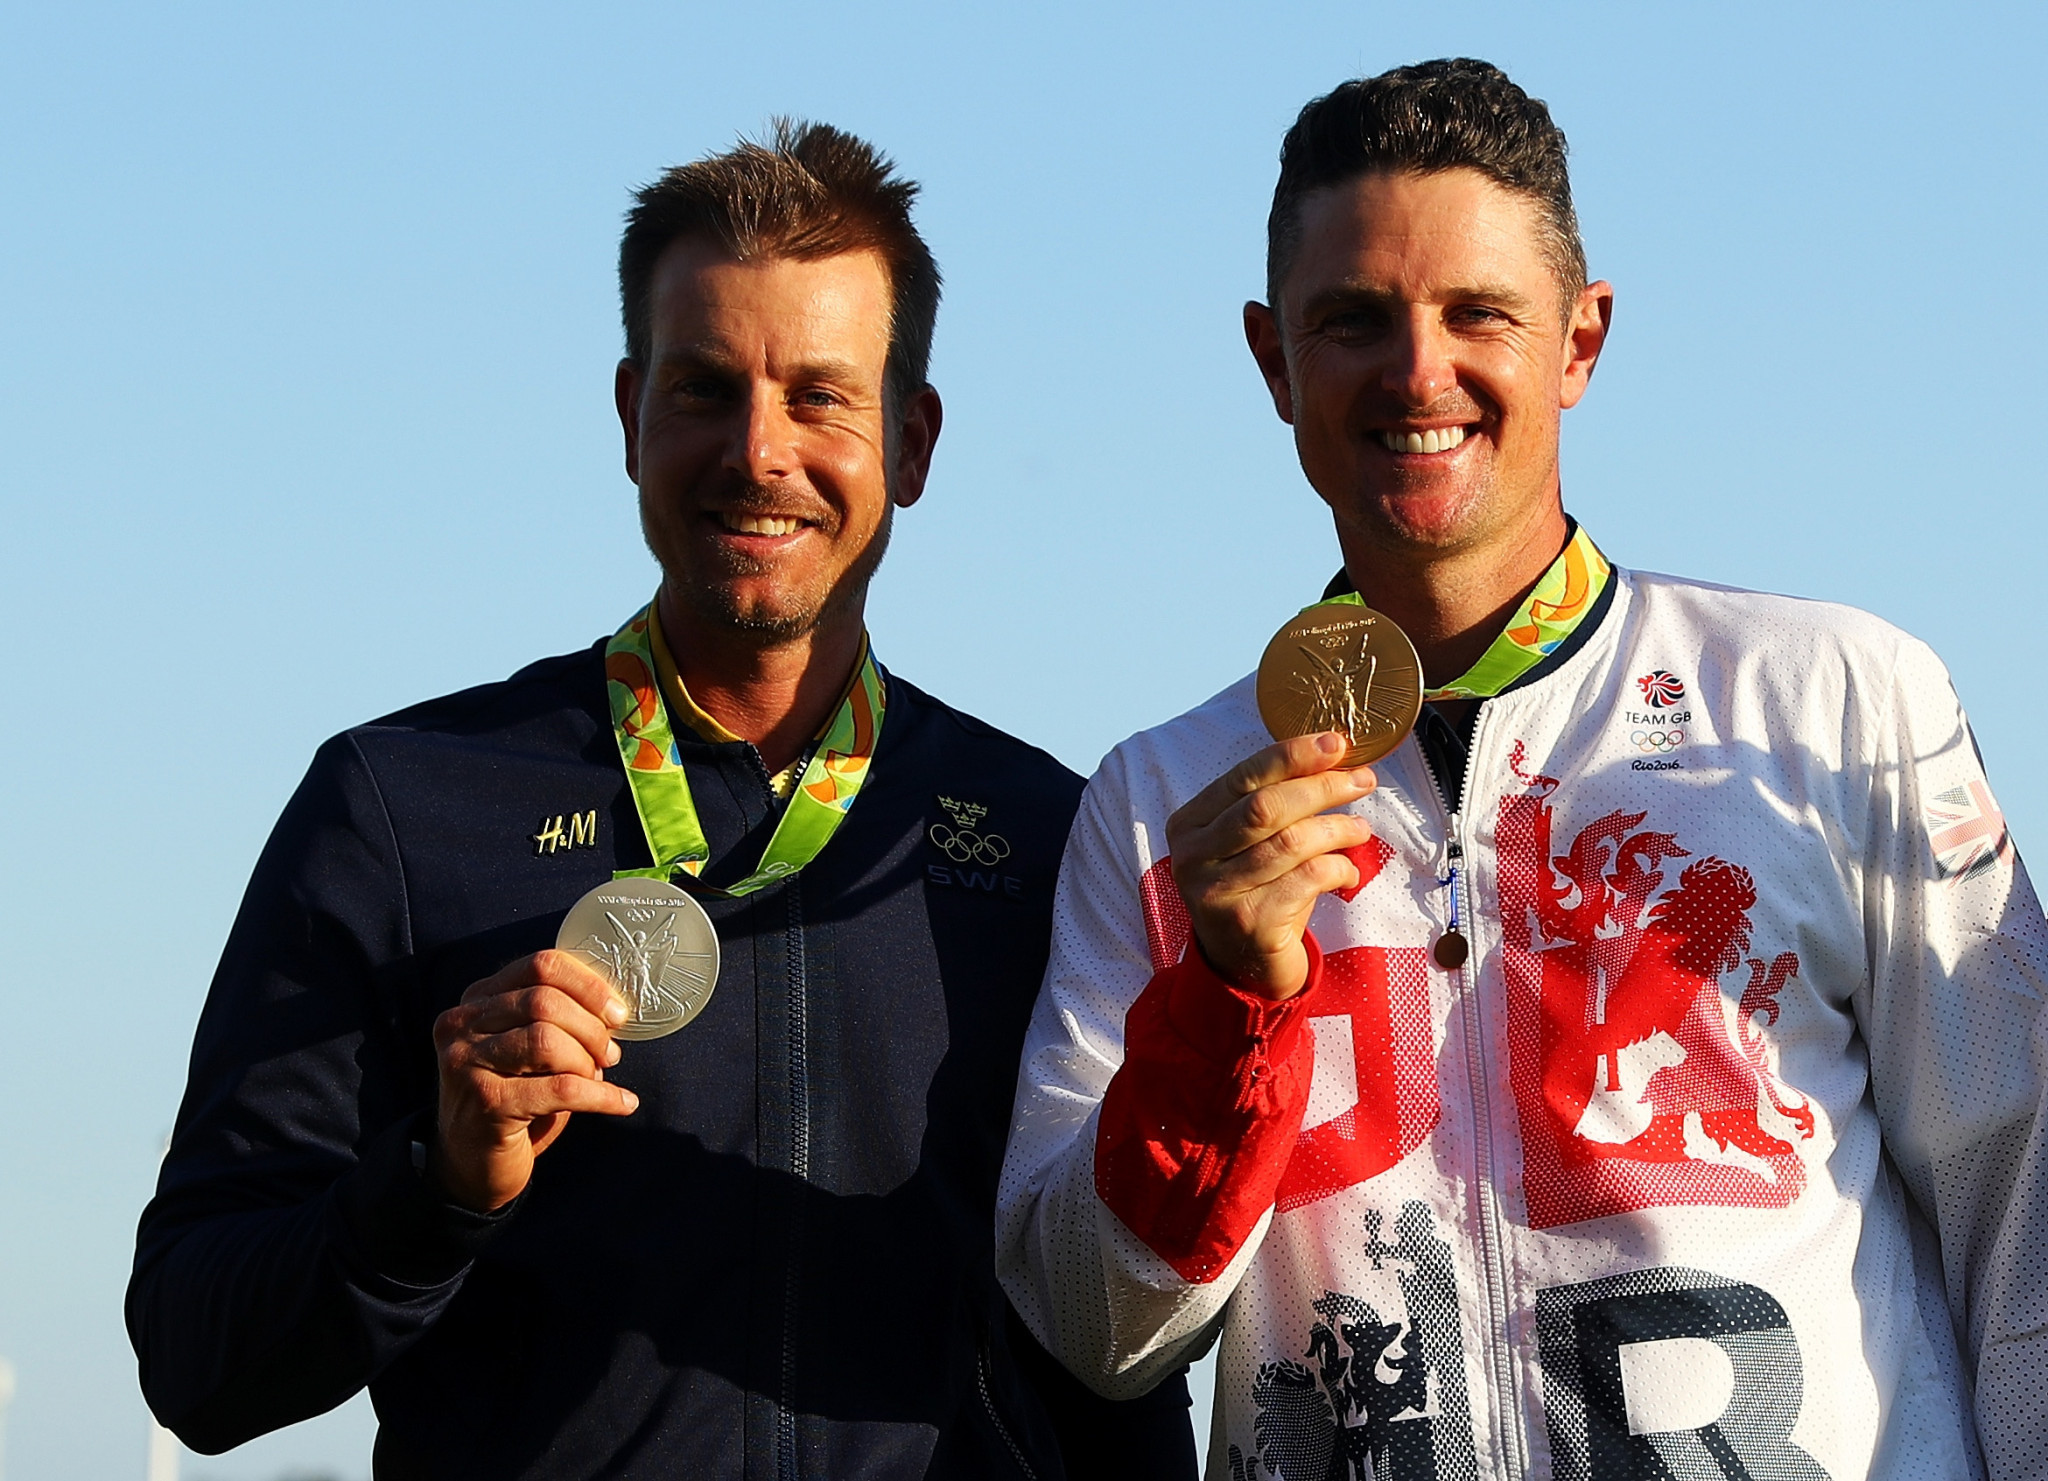 Britain's Justin Rose, right, and Sweden's Henrik Stenson were first and second at Rio 2016 ©Getty Images